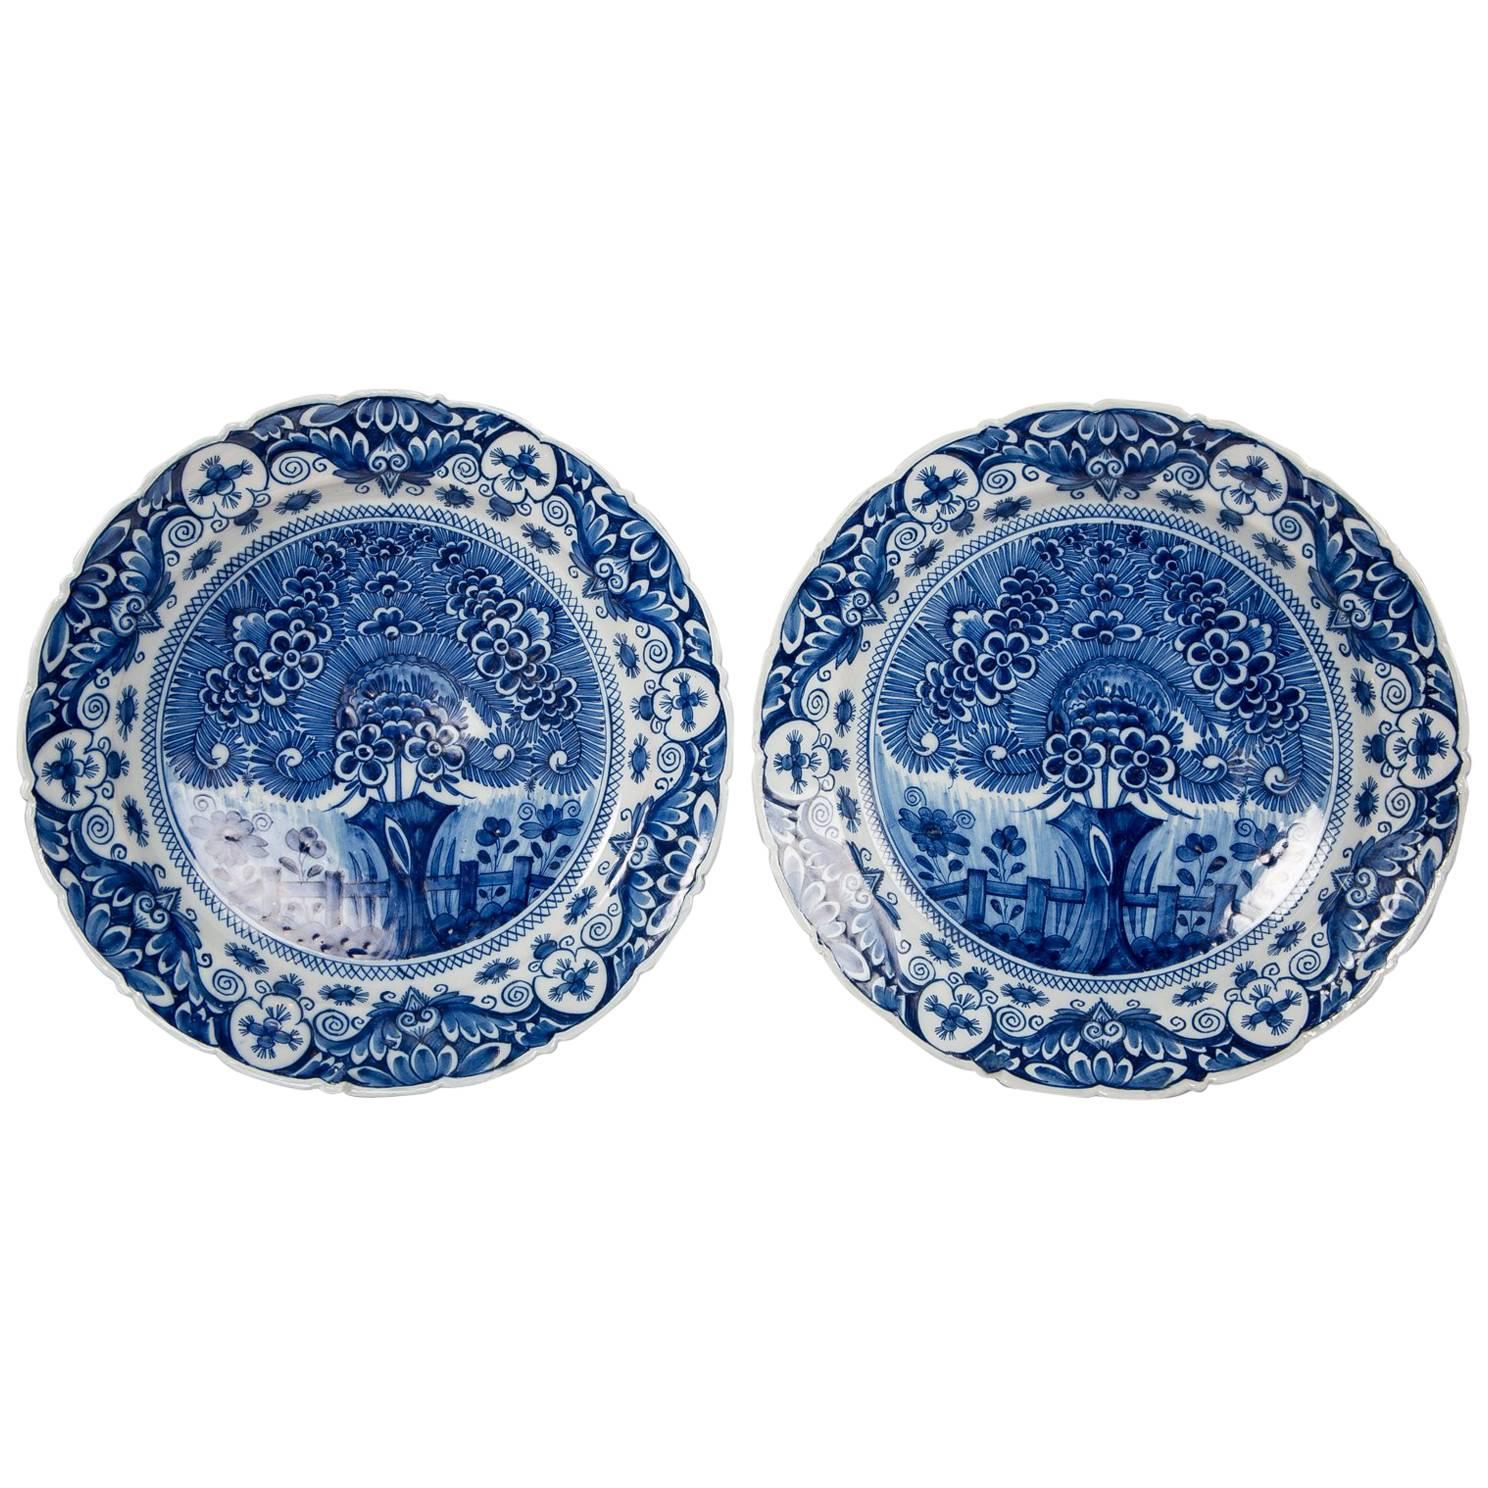 Blue and White Delft Chargers Theeboom Pattern made by "The Claw" circa 1770